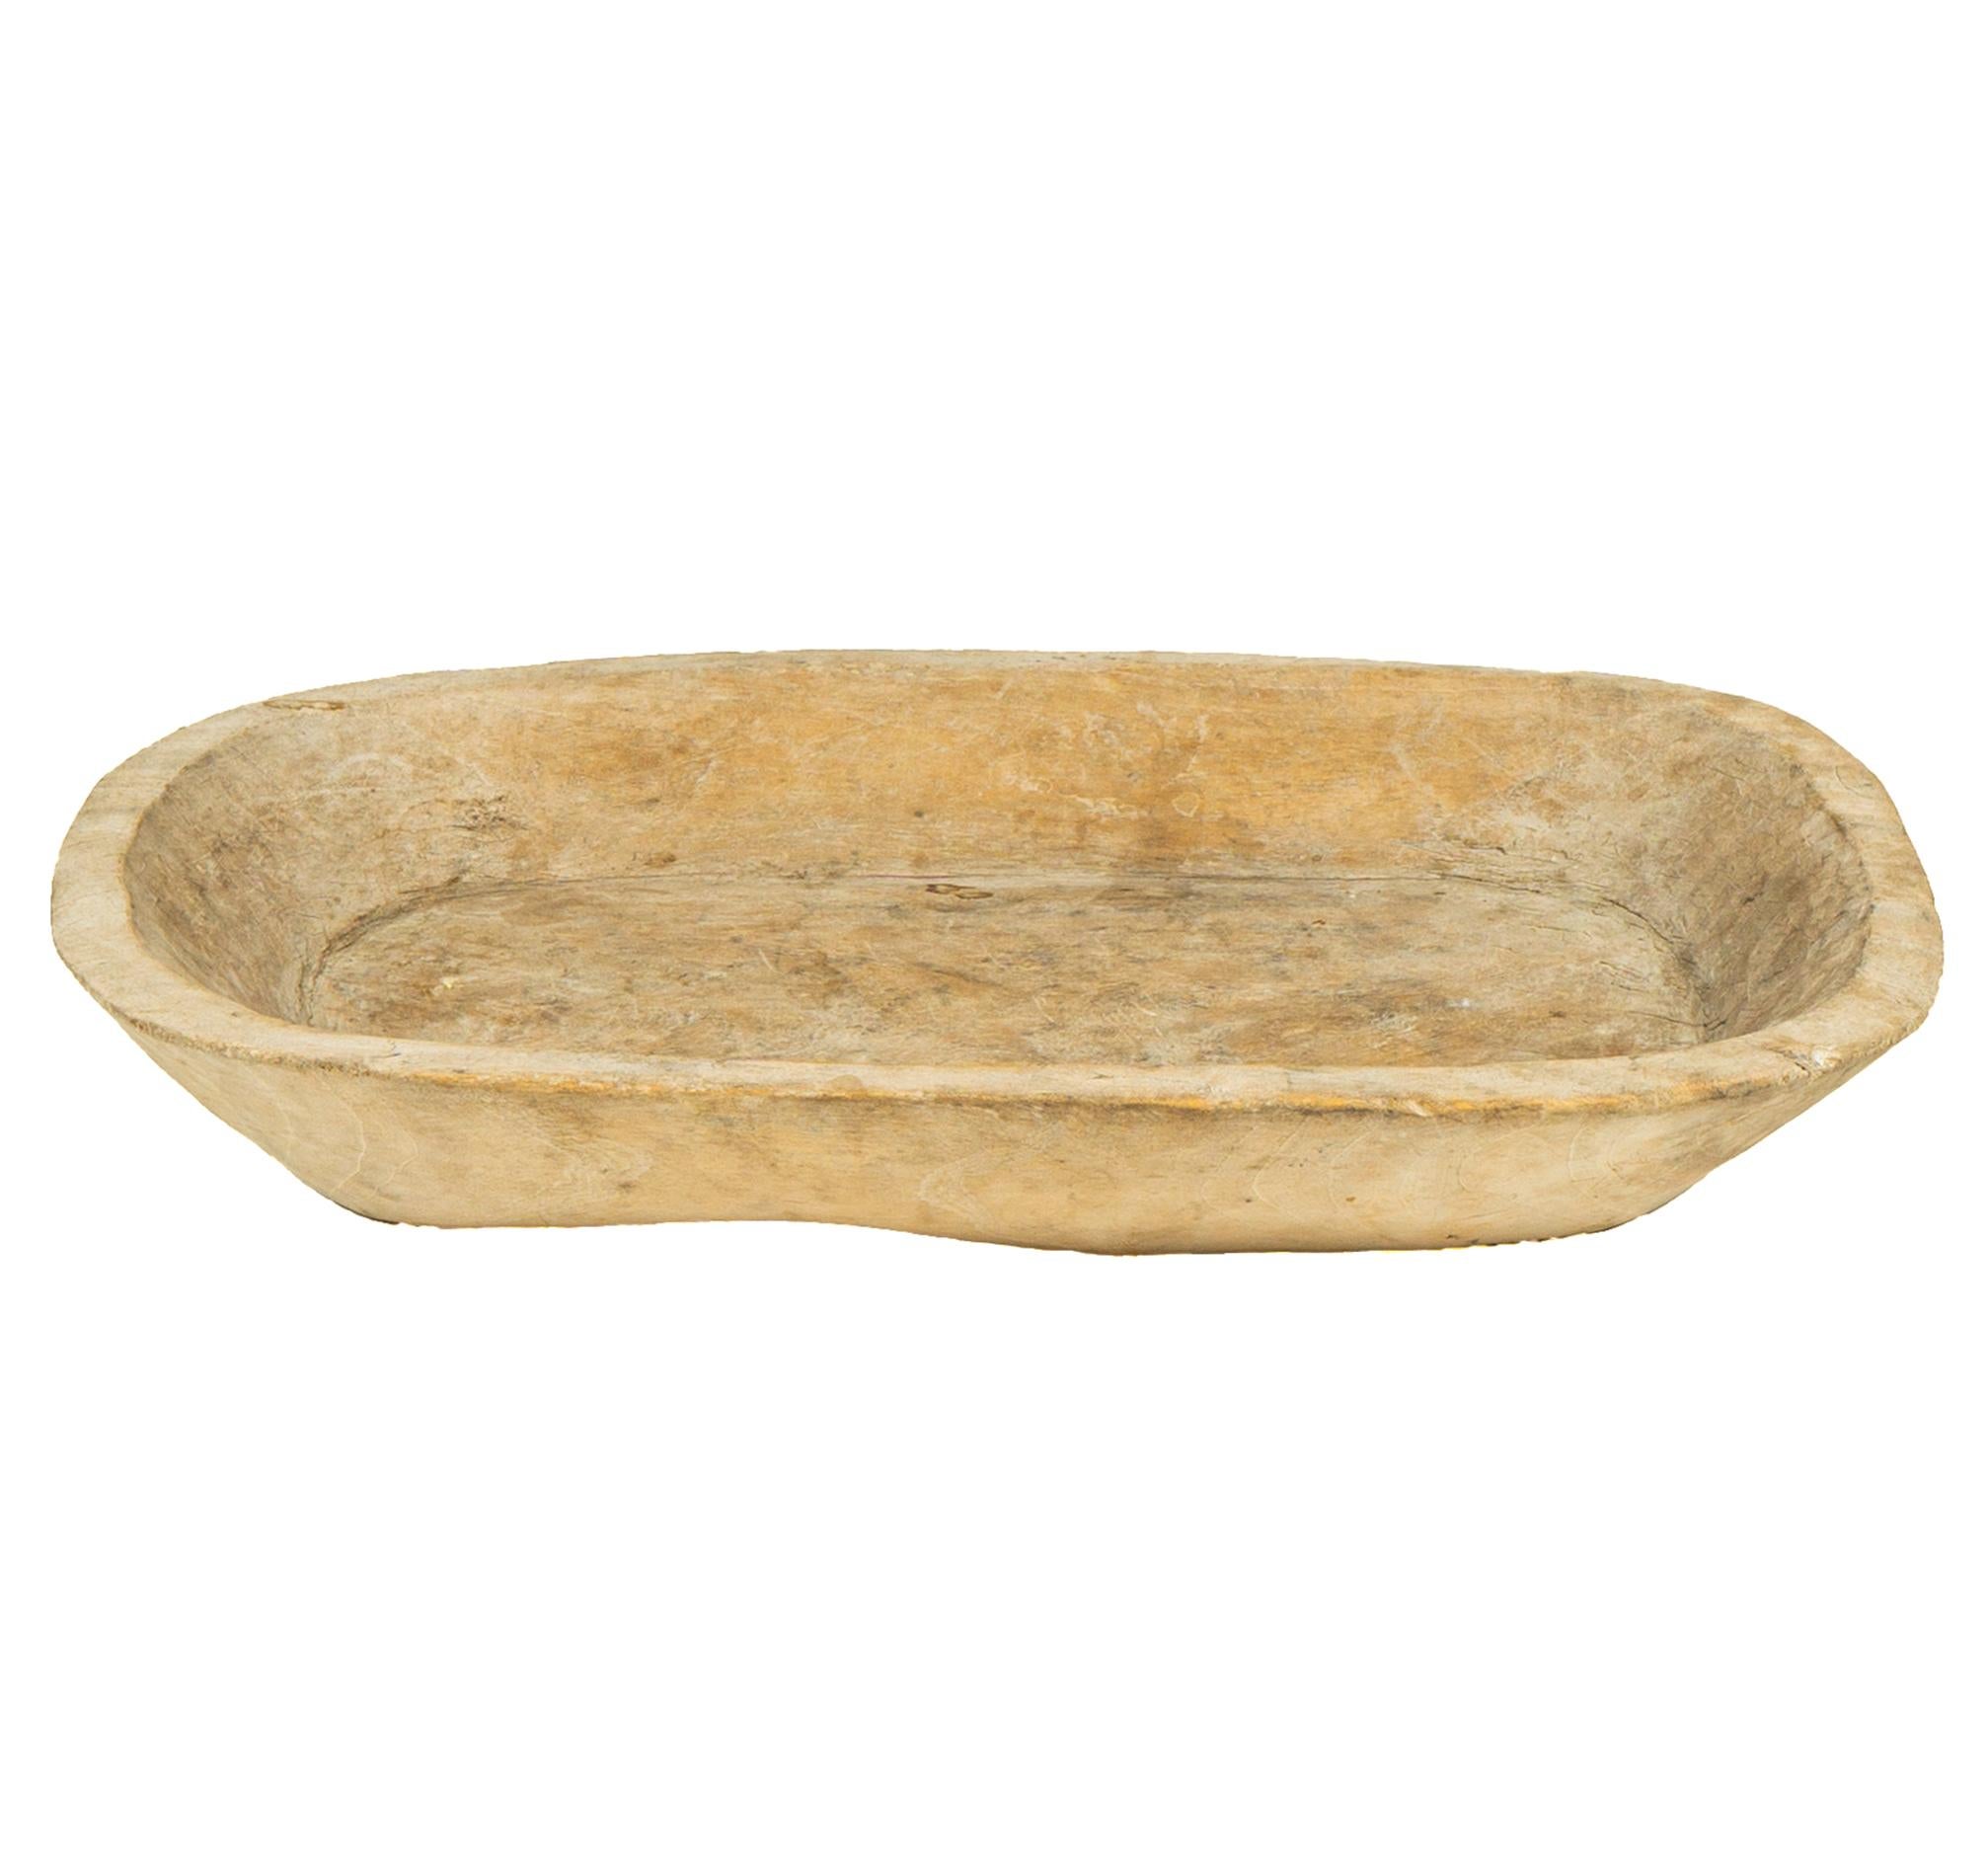 Mexican Mesquite Trough Bowl from Zacatecas, Northern México, Late 19th Century For Sale